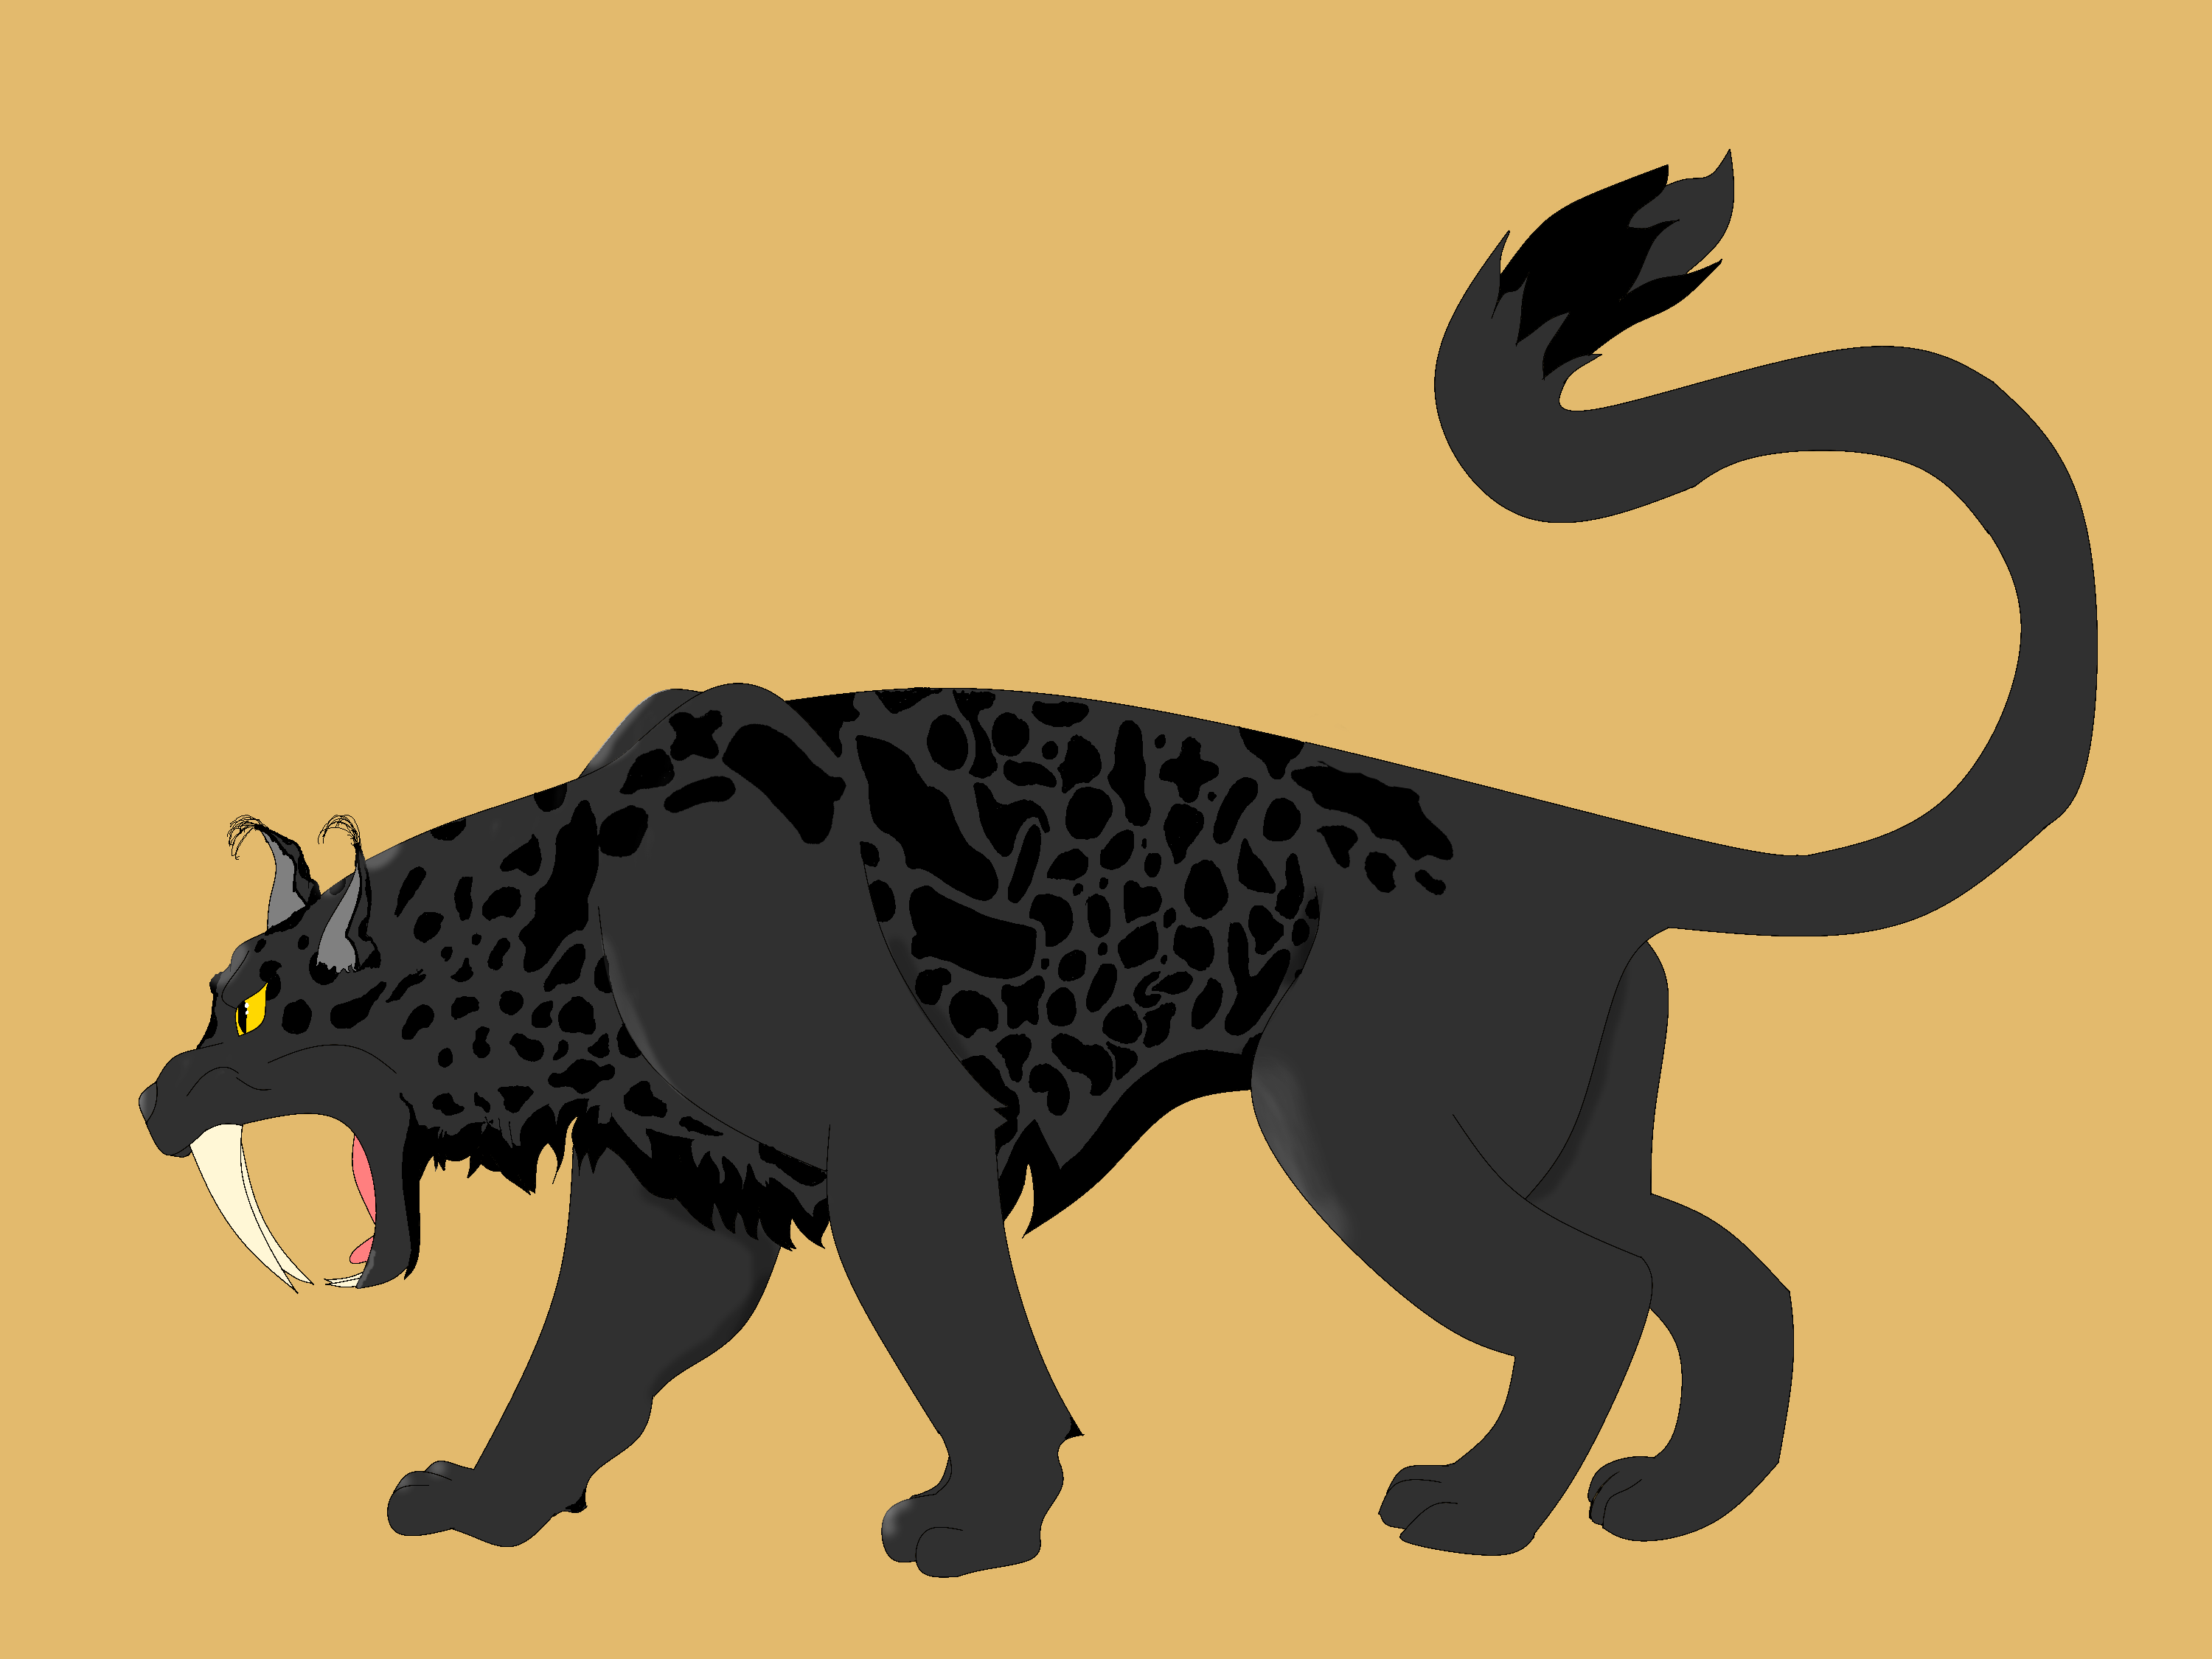 Cover image for webserial "A Smear of Blood." The Great Goddess in cat-form, a fantasy version of a sabertoothed cat, dark grey with black markings, tufted ears and tail. Standing in front of off yellow background.